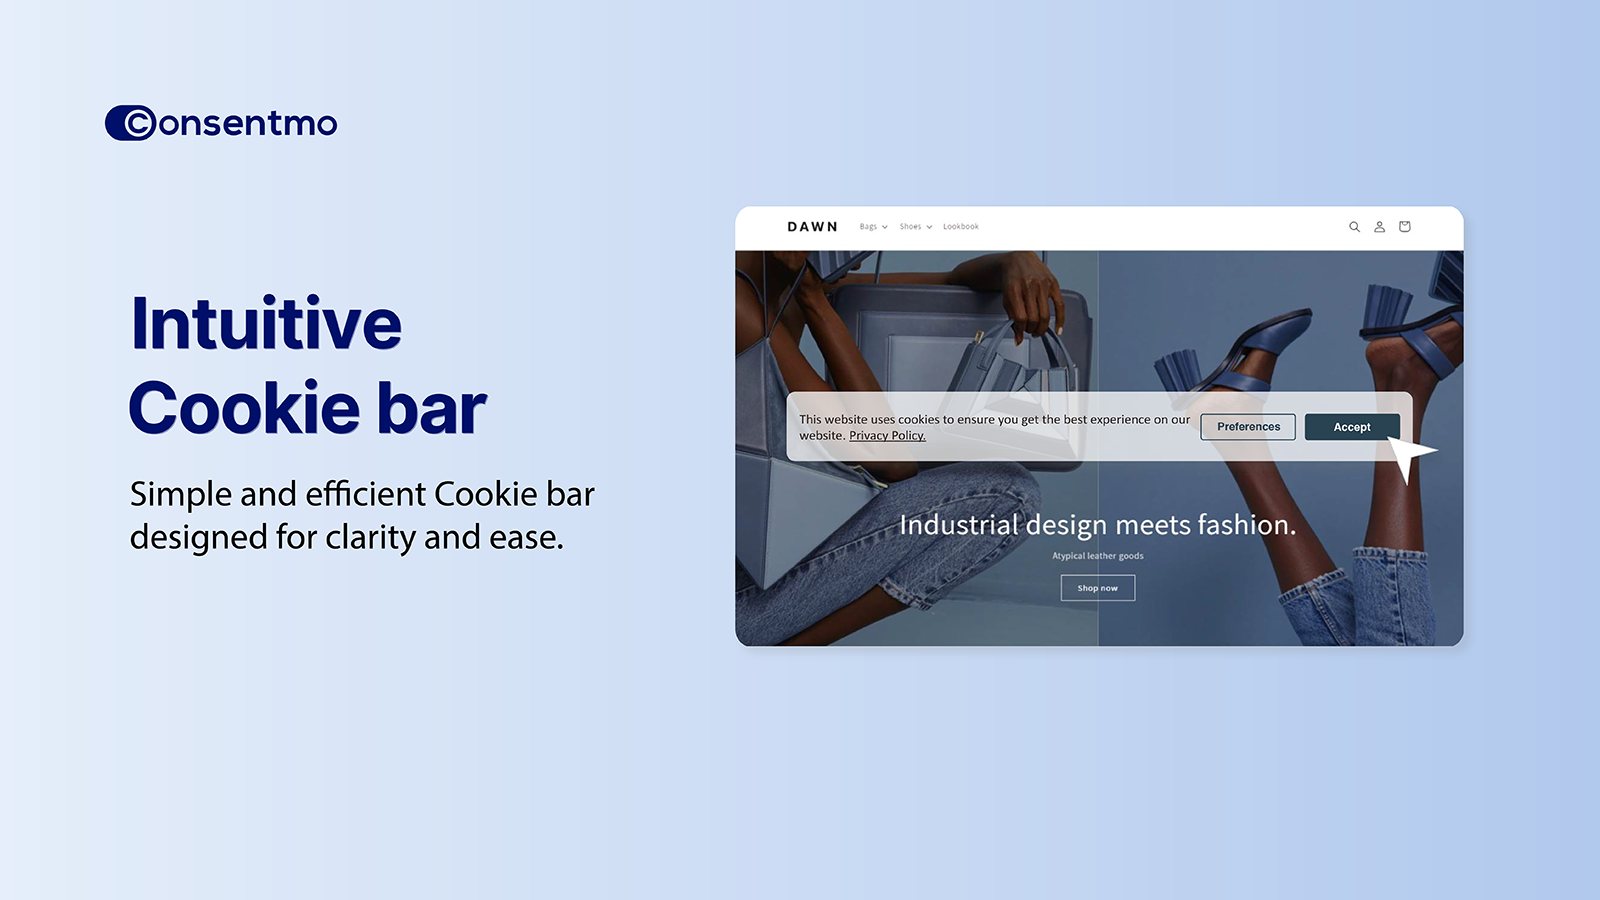 Consentmo's user-friendly and intuitive Cookie bar.